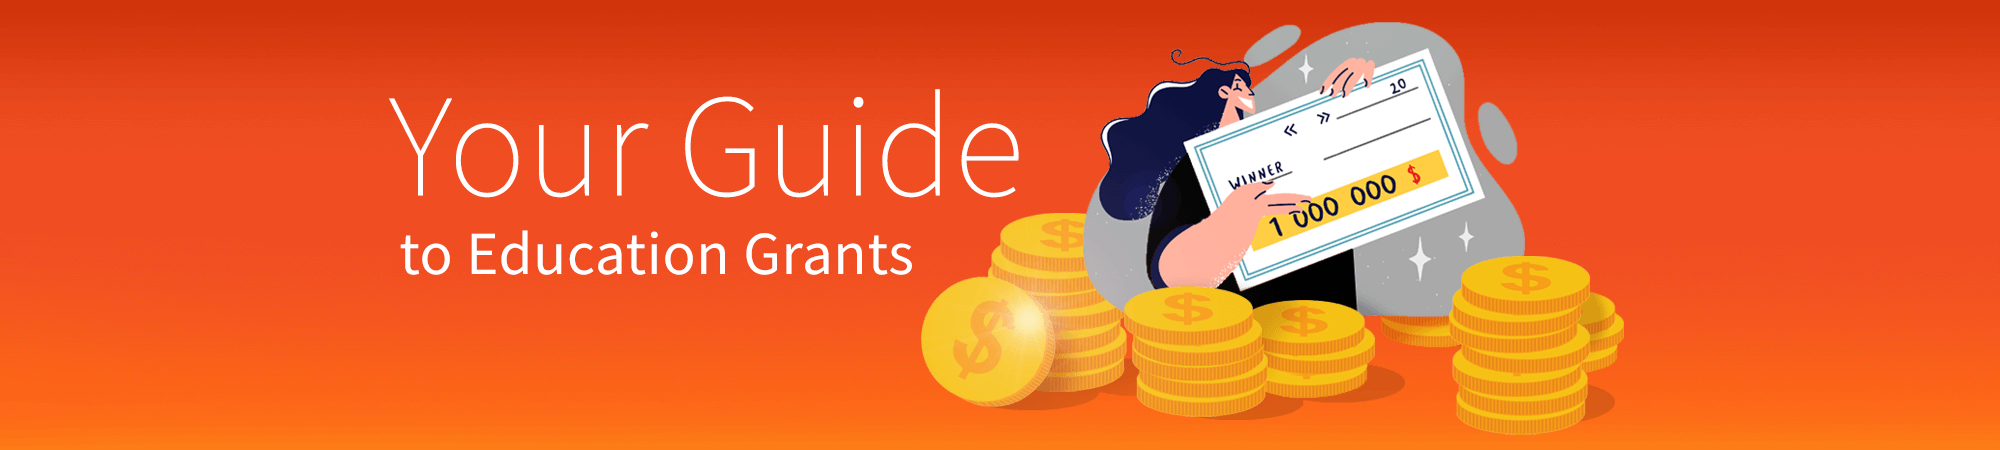 An illustrated web banner showing an illustrated person holding a cheque and surrounded by stacks of coins. White text against an orange background reads, "Your Guide to Education Grants".